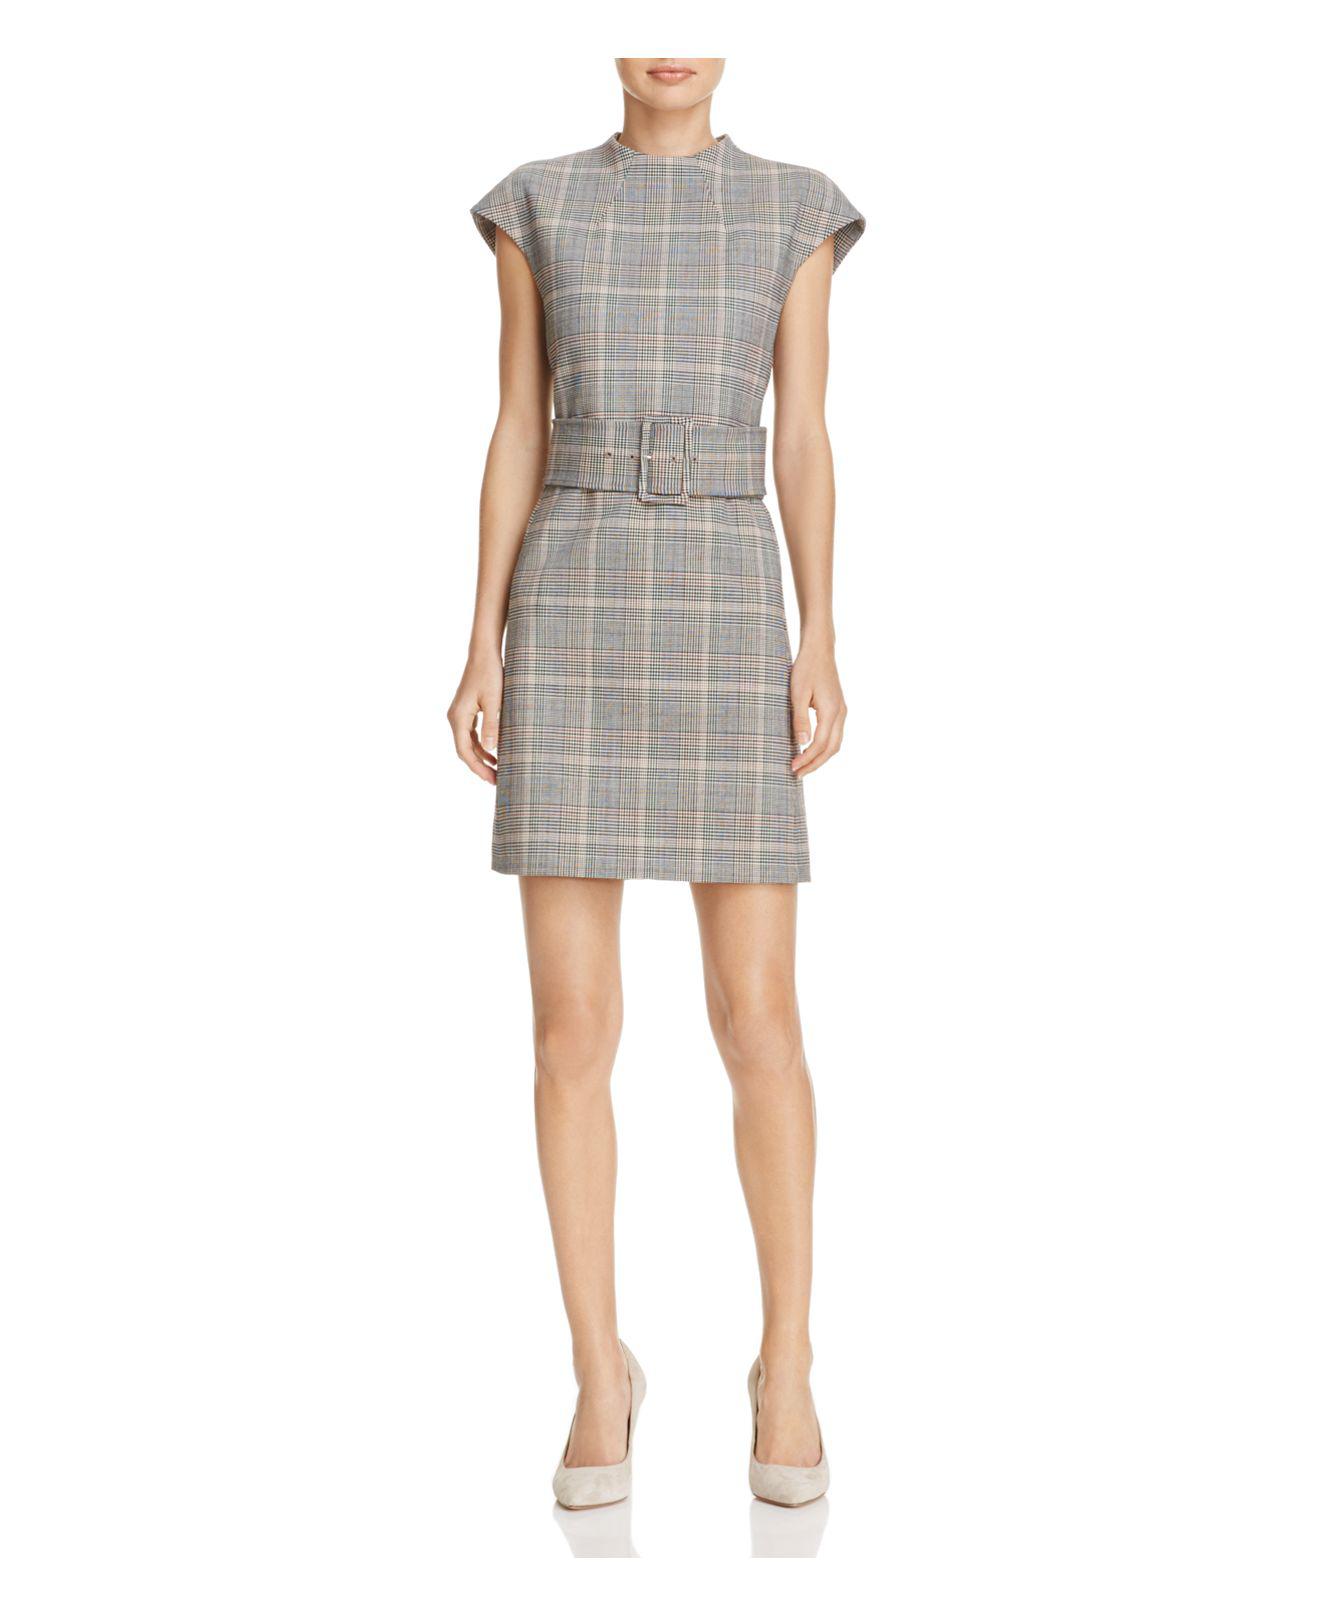 Theory Mod Belted Plaid Dress in Ivory (White) - Lyst